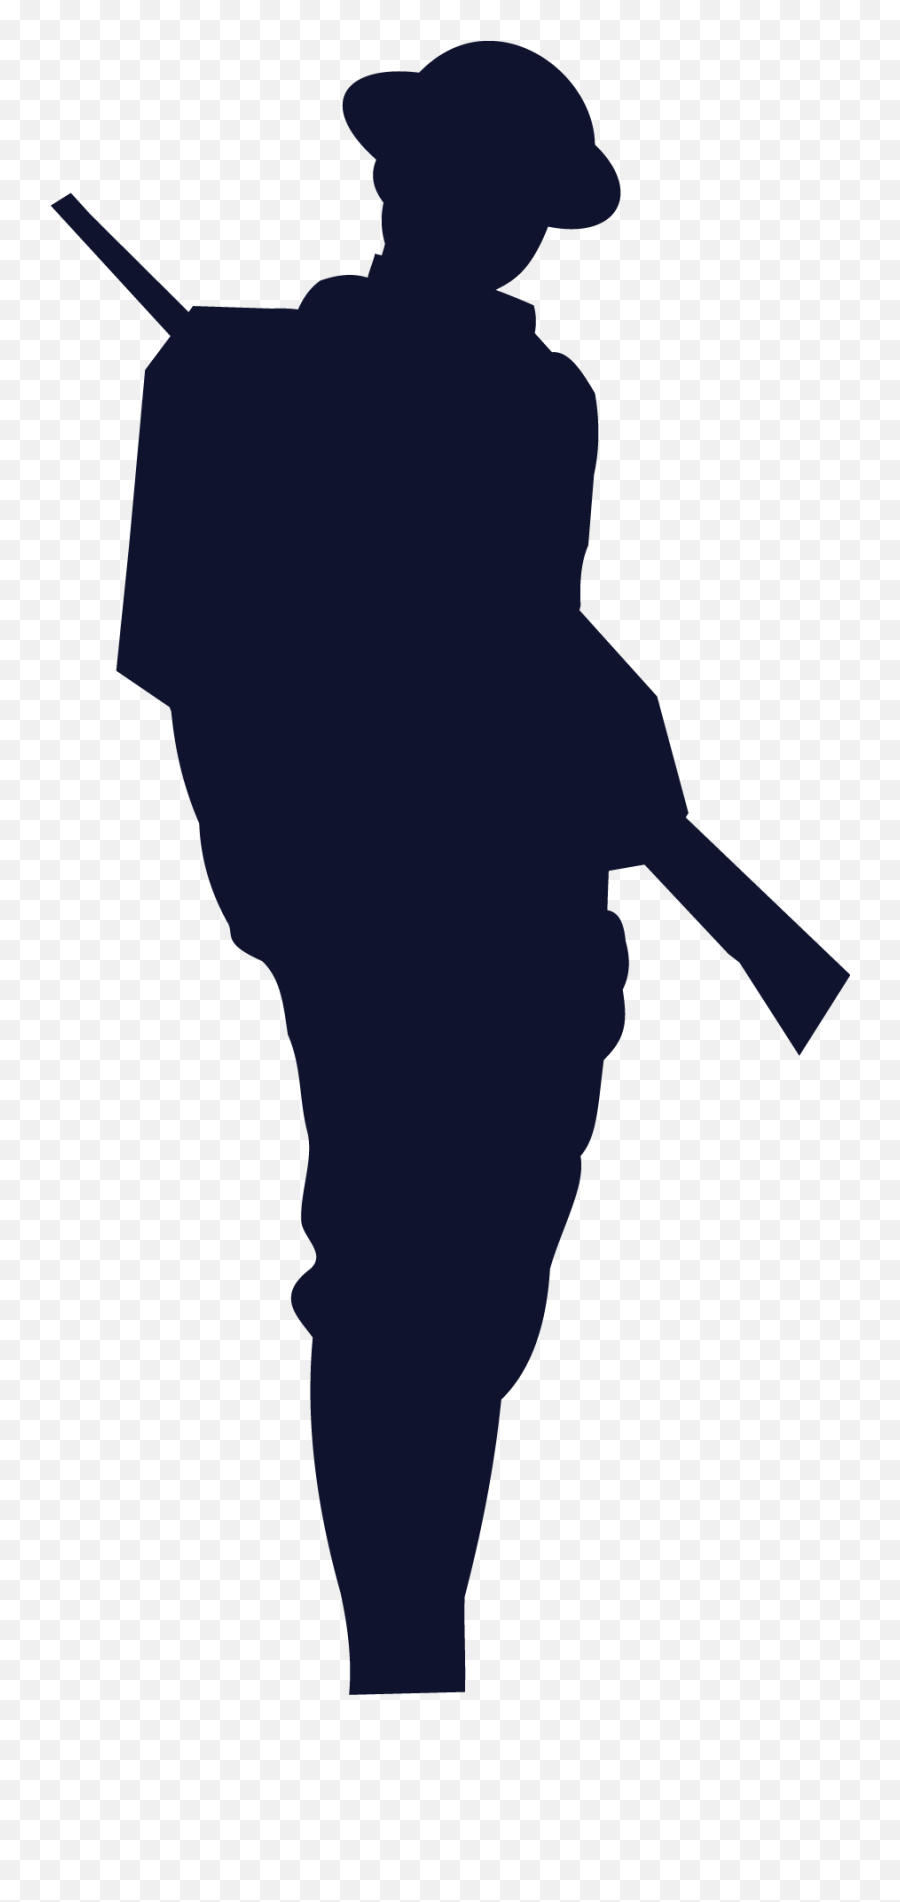 United States World War I Centennial Commission Ii - World War Soldier Silhouette Png,Ww2 Icon